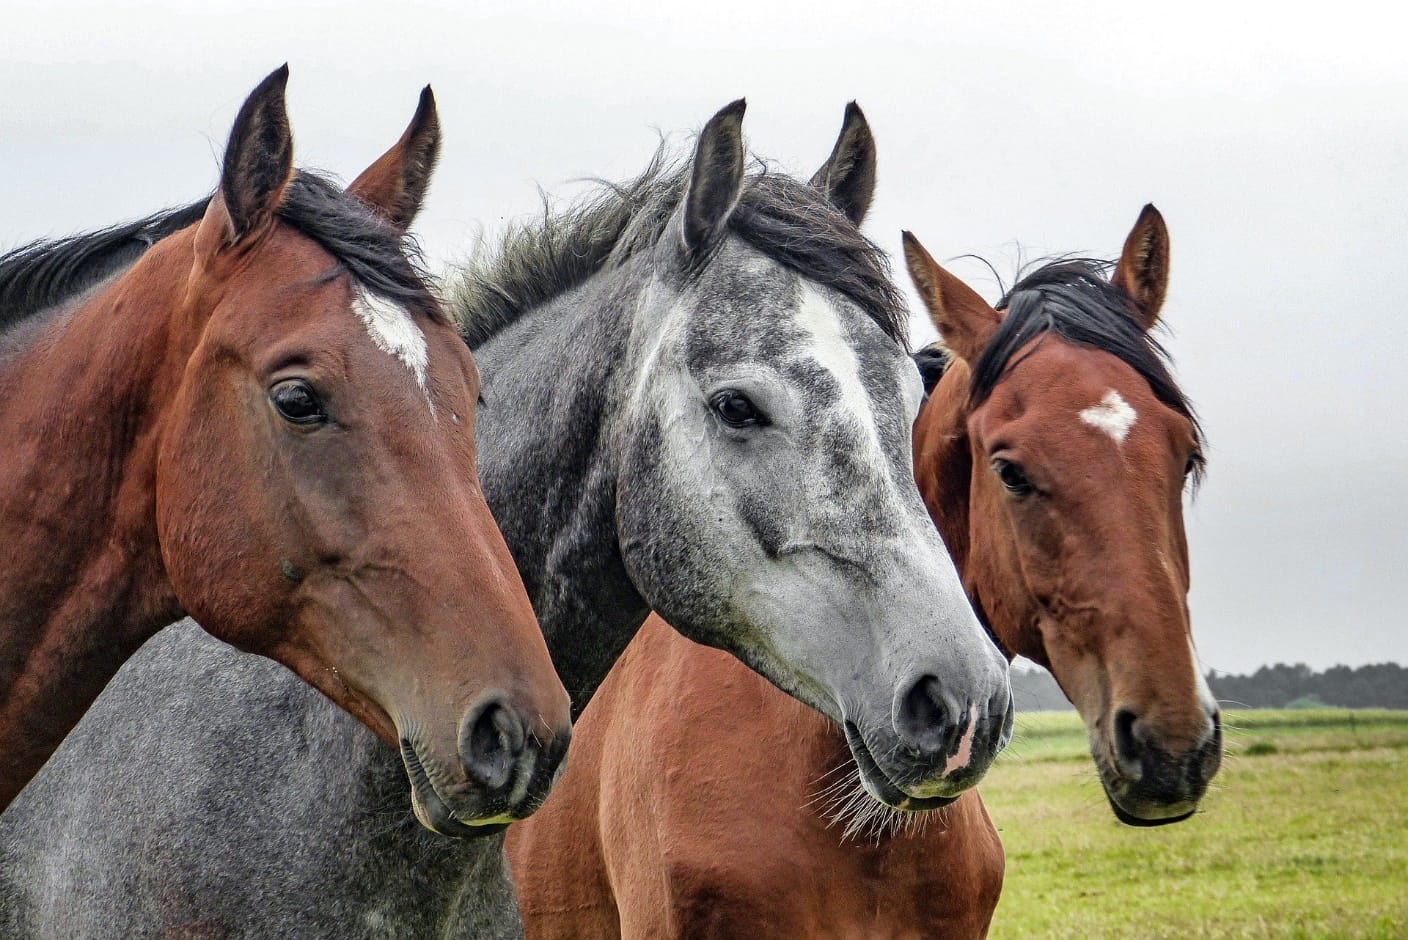 Why You Should Use CBD Oil for Horses